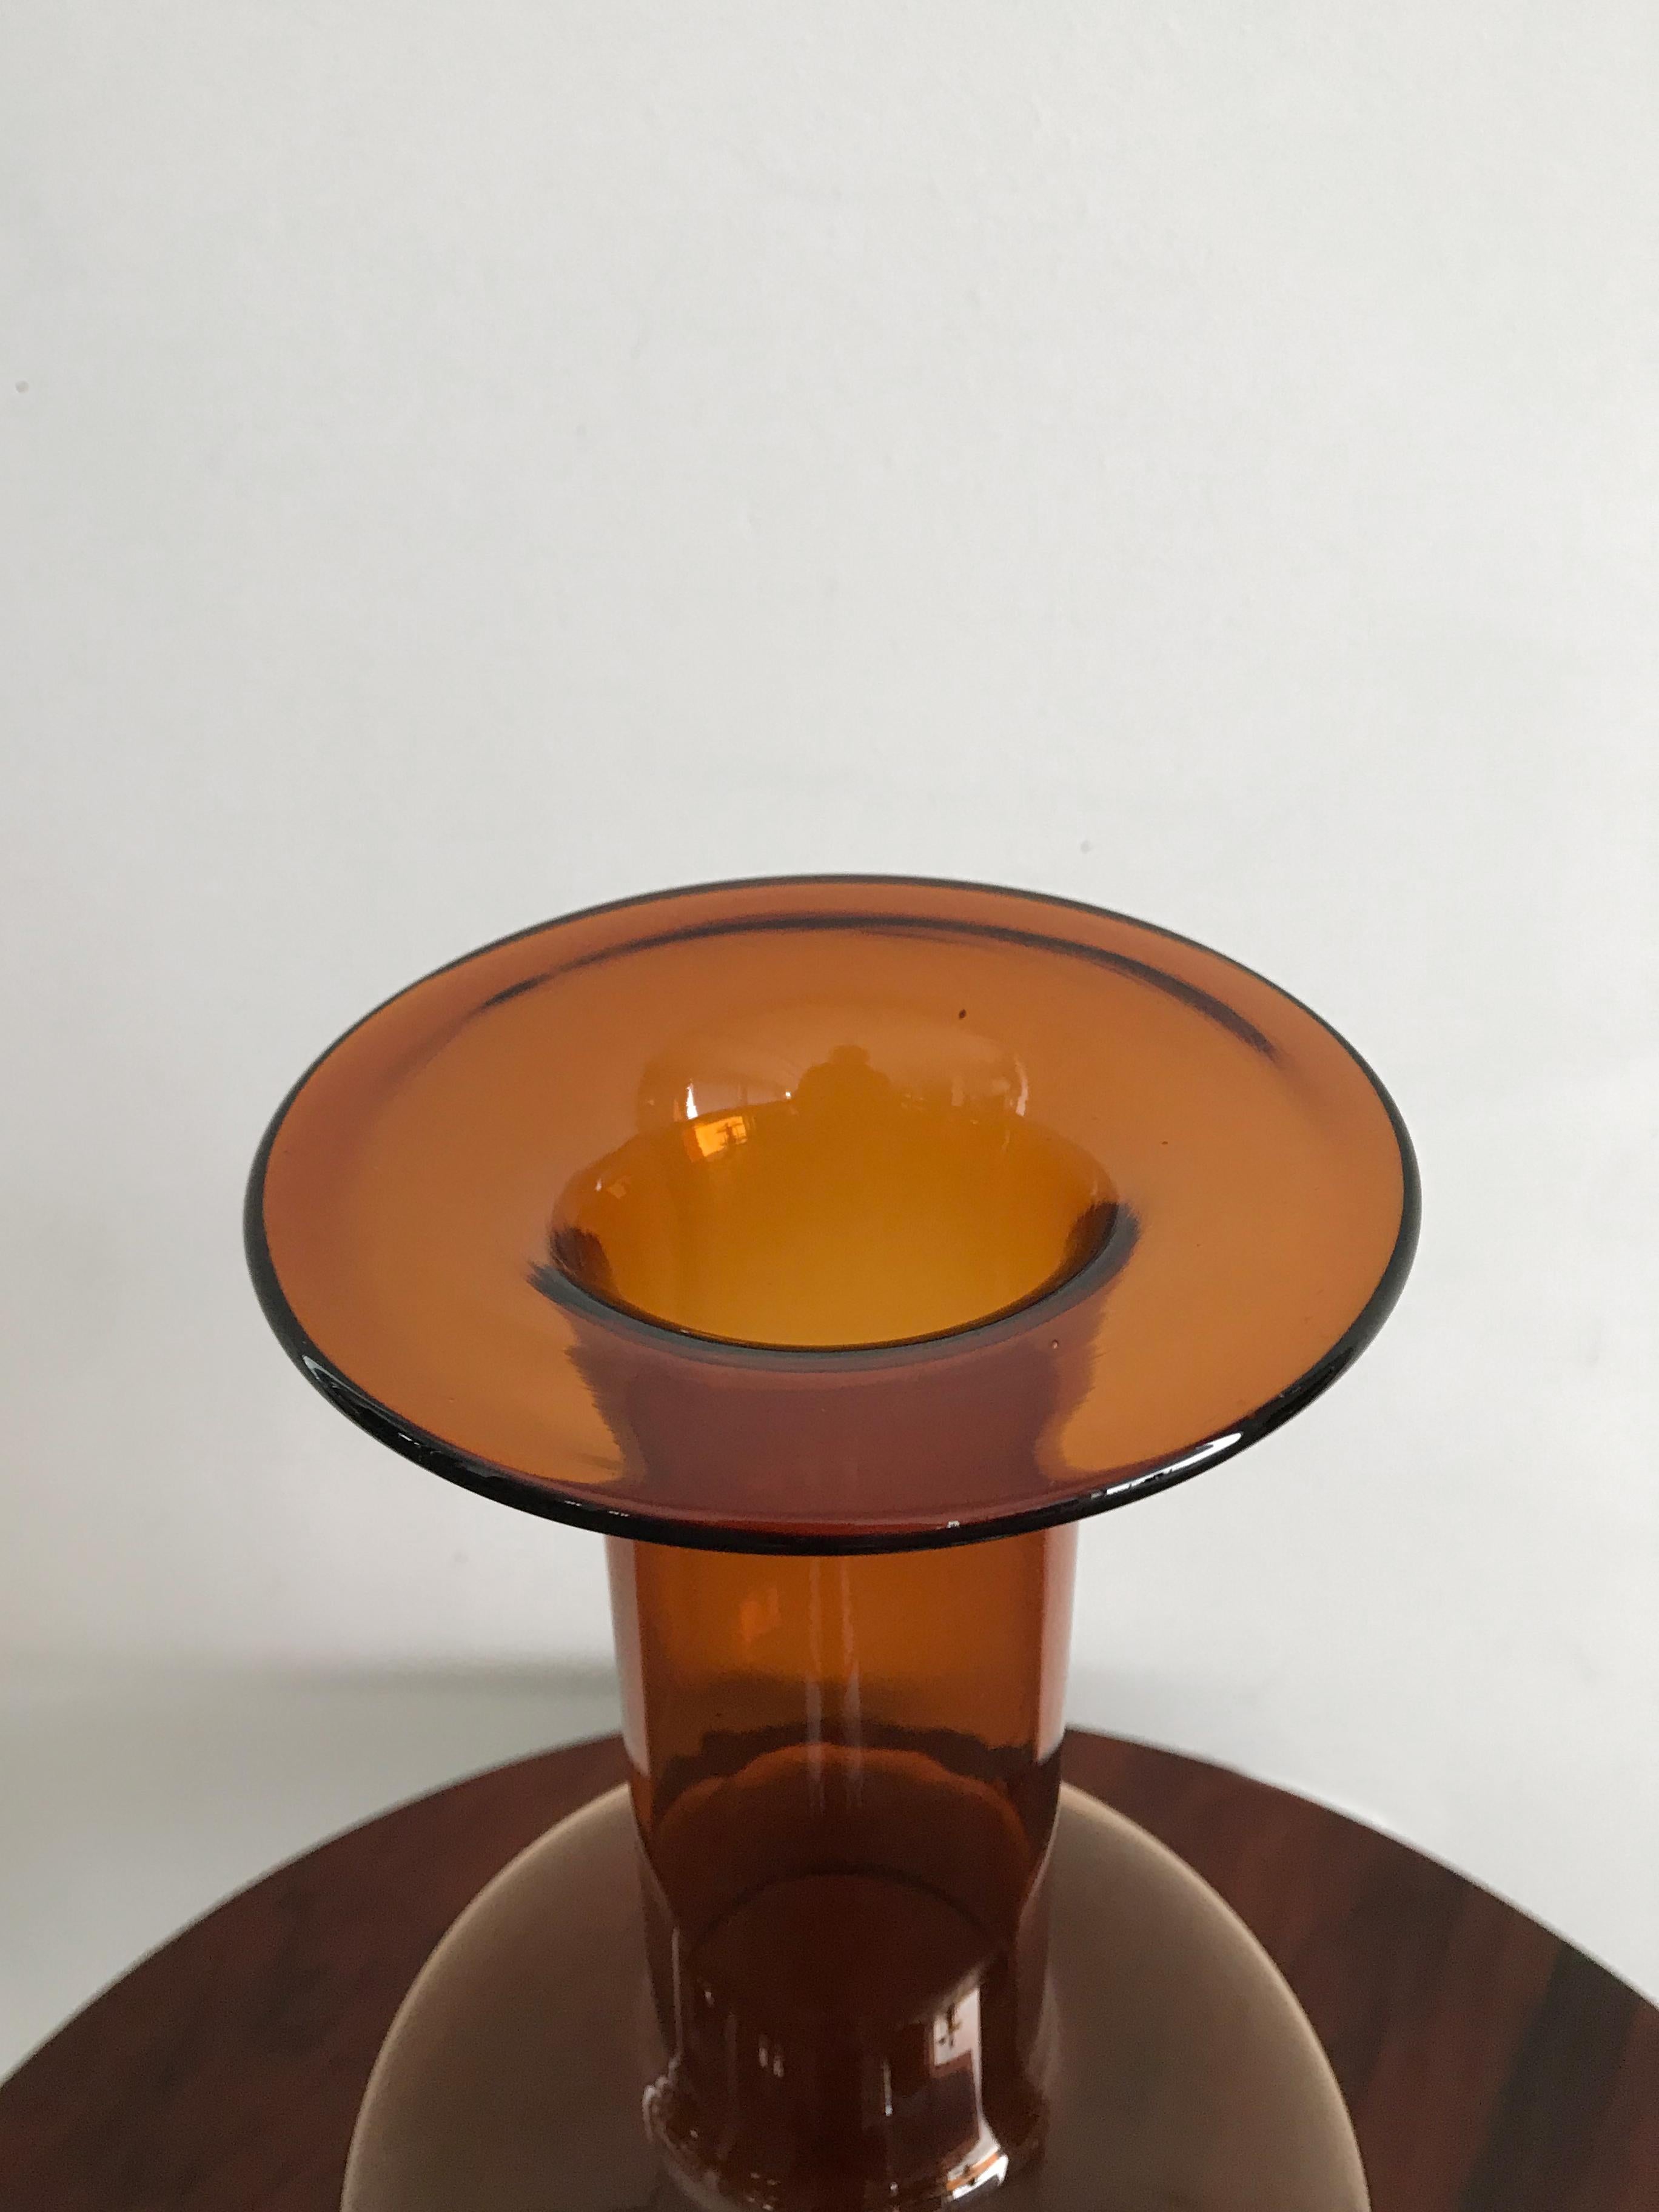 Iconic yellow glass Scandinavian bottle or vase designed by Otto Brauer for Holmegaard, made in Denmark 1960s, extra large sizes.

Please note that the vase is original of the period and this shows normal signs of age and use.
 